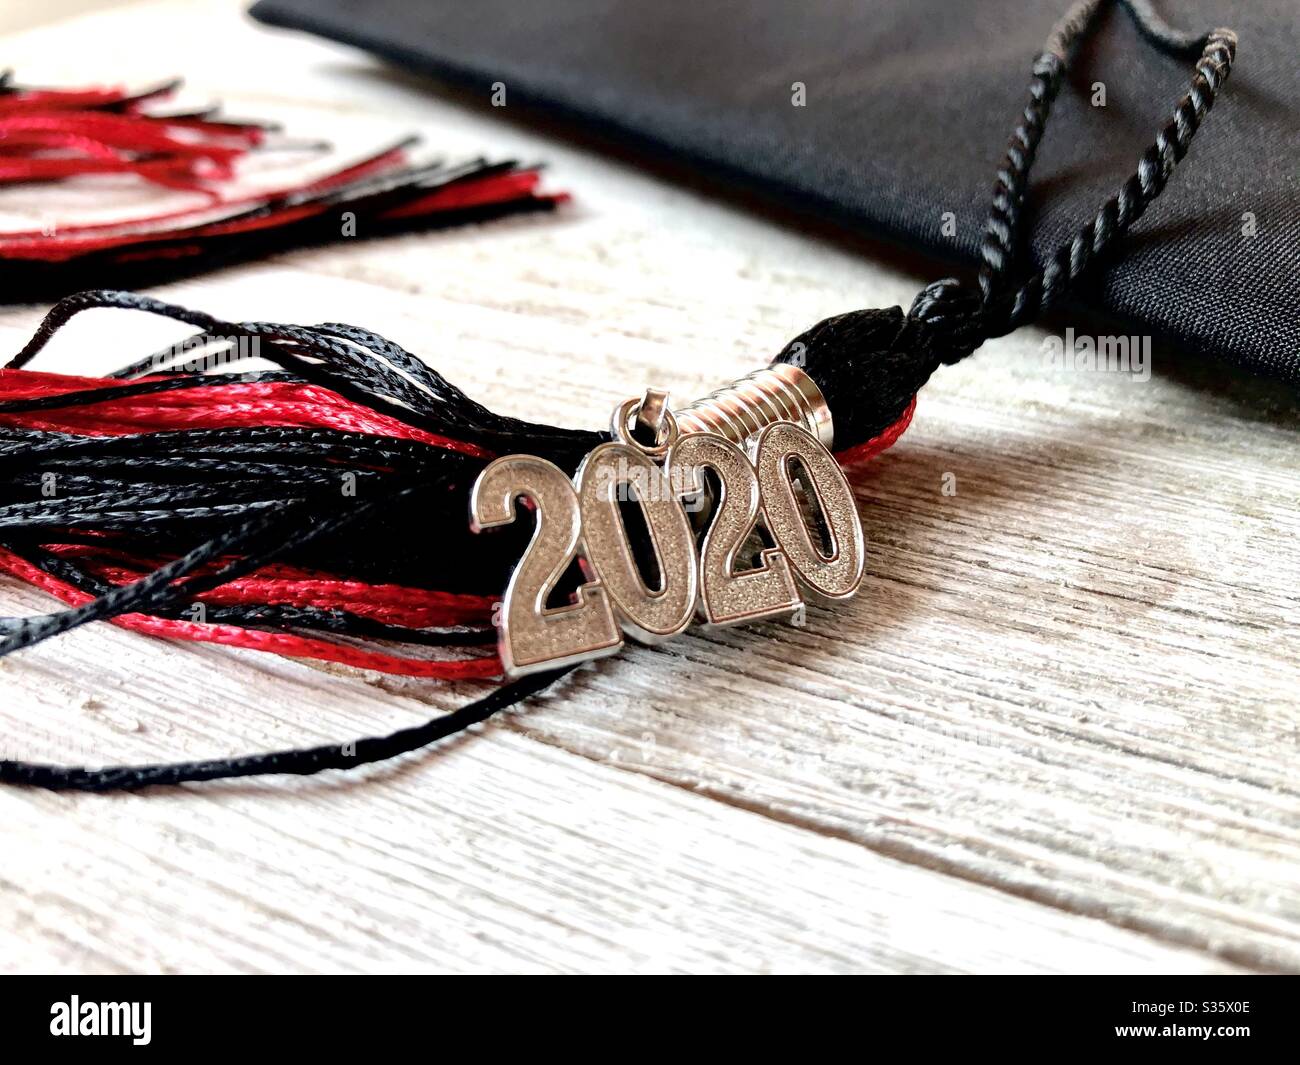 Red and black 2020 graduation cap and tassel on a wooden surface Stock Photo